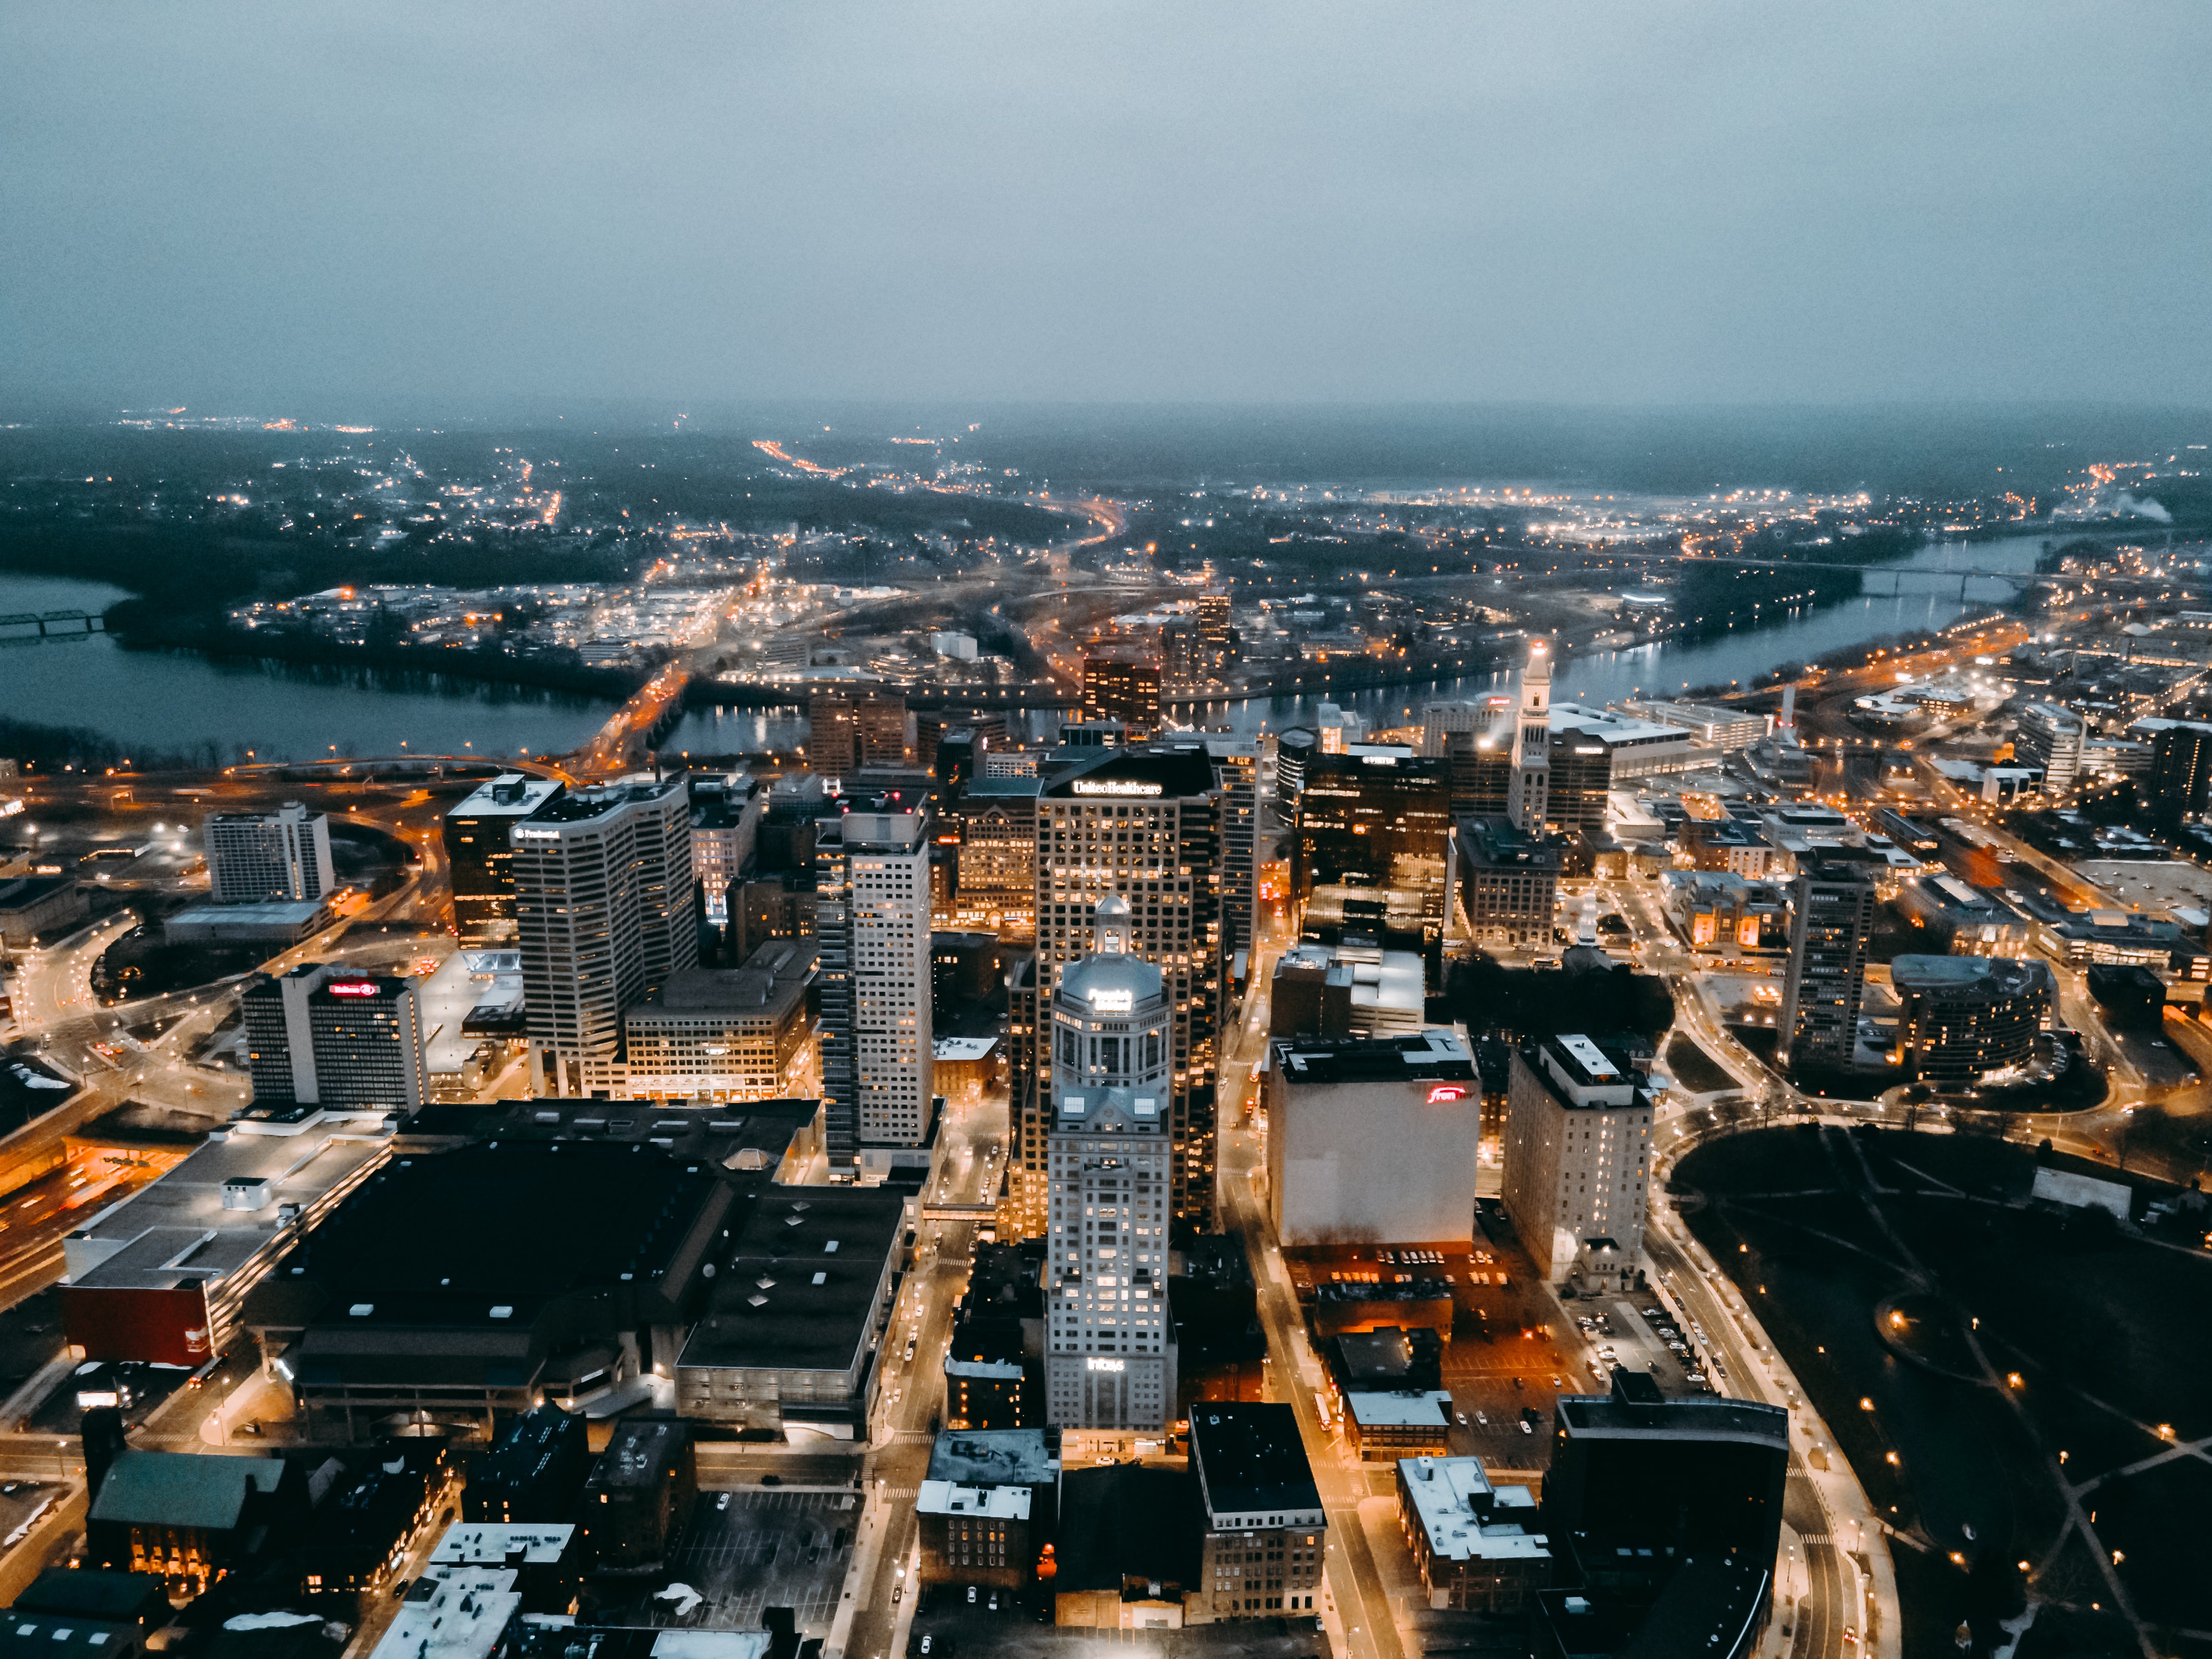 rivers, cities, city, building, lights, view from above, horizon UHD